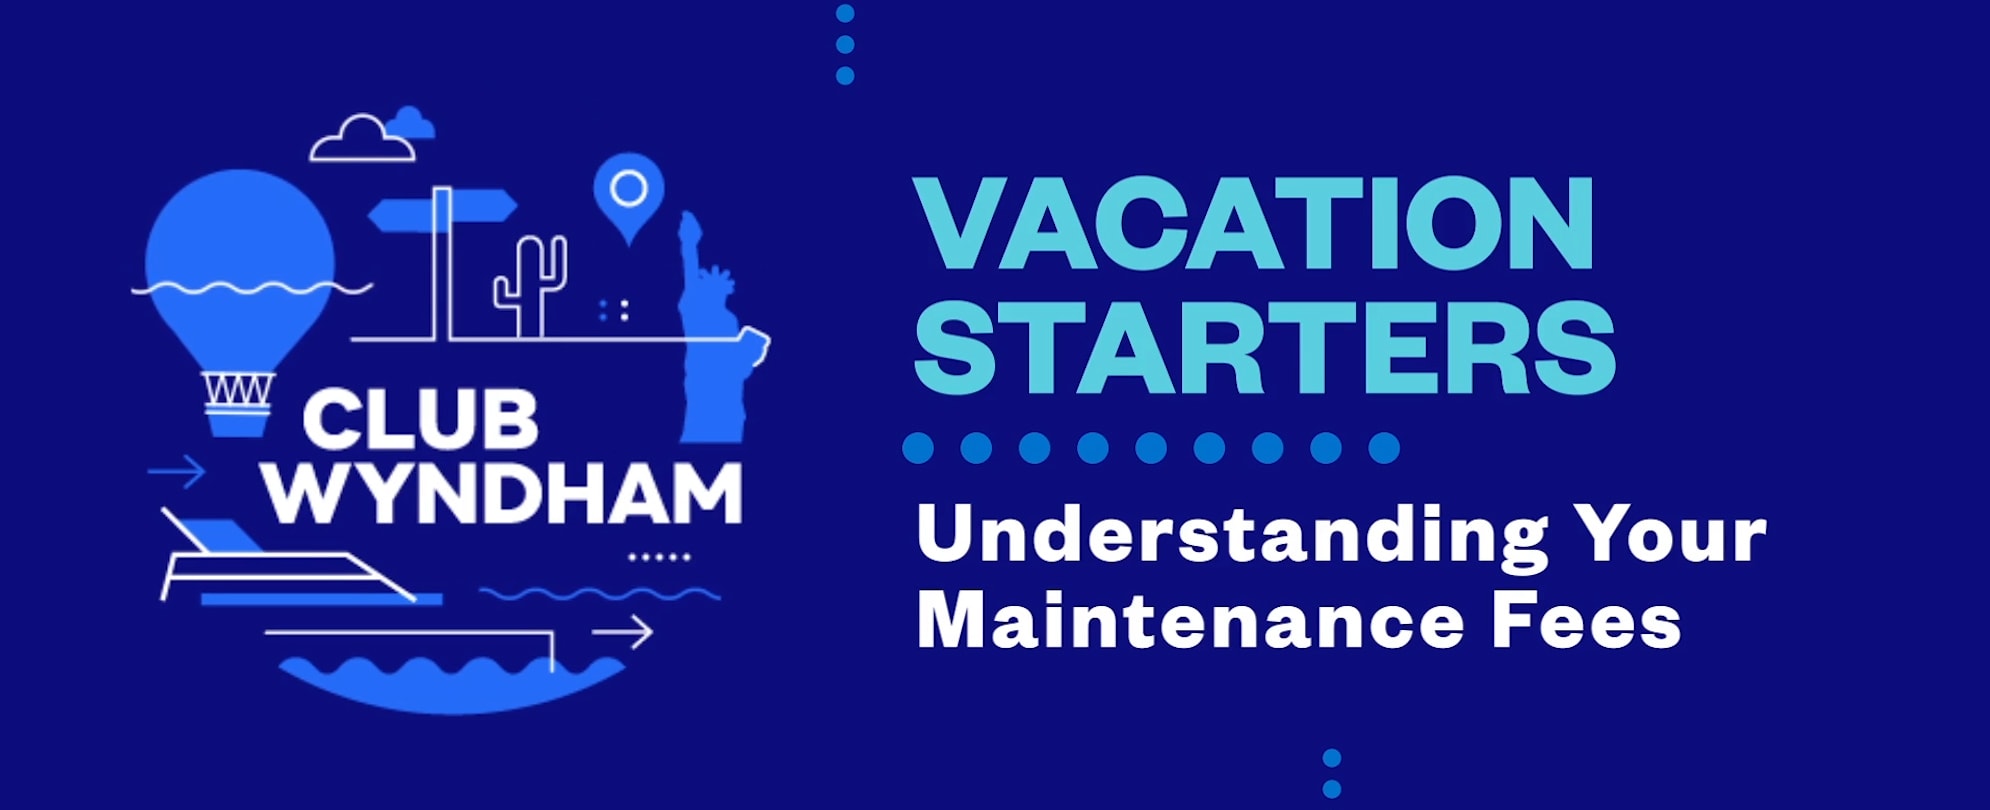 Understanding Your Maintenance Fees overview from the Club Wyndham Vacation Starters video series